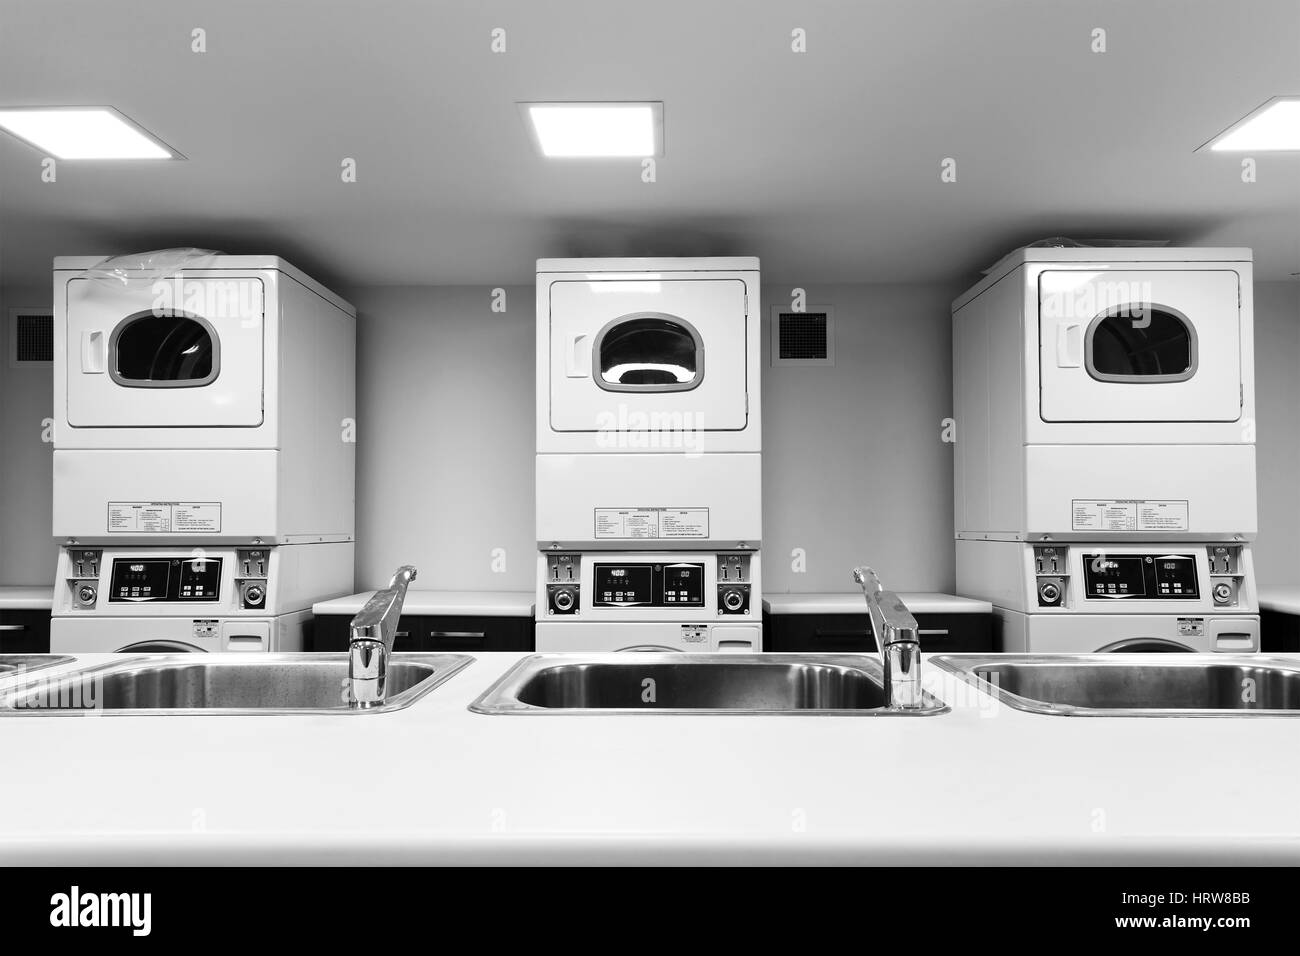 Line of big self-service washing machines and dryers and laundry next to water sinks and taps in tabletop waiting for customers Stock Photo